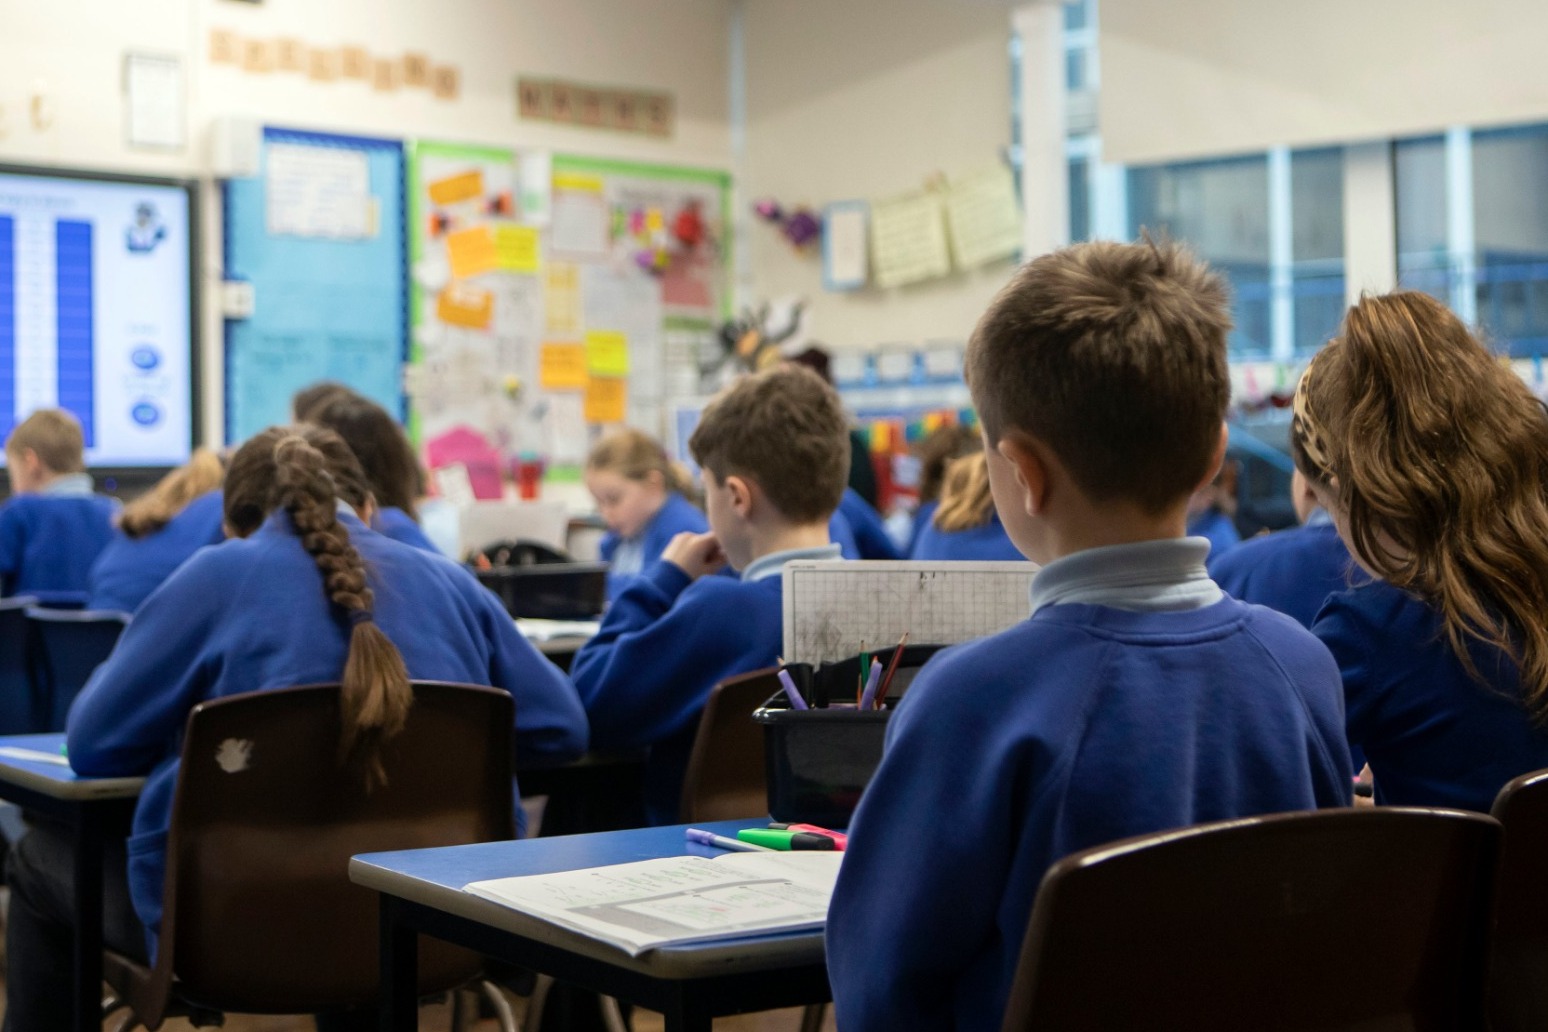 SCHOOLS IN WALES COULD REOPEN IN JUNE, FIRST MINISTER SAYS 